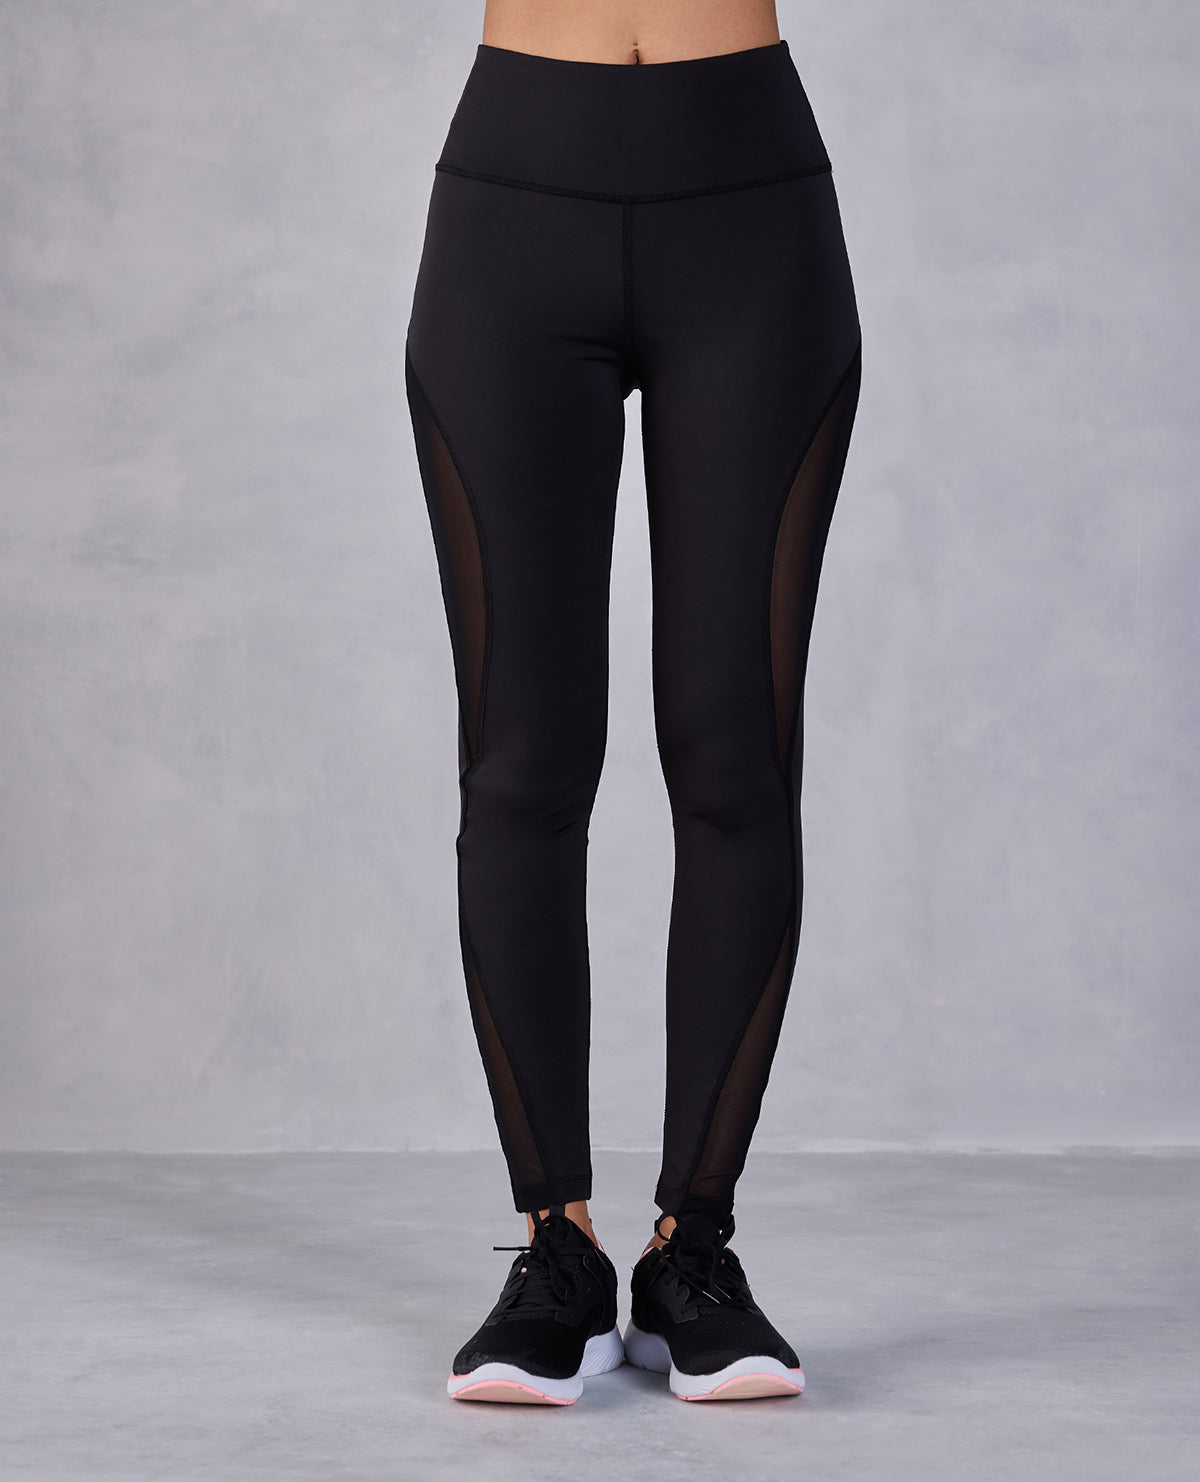 Laasa Sports | JUST-DRY Mesh Panel 7/8 Go Train Tights for Women